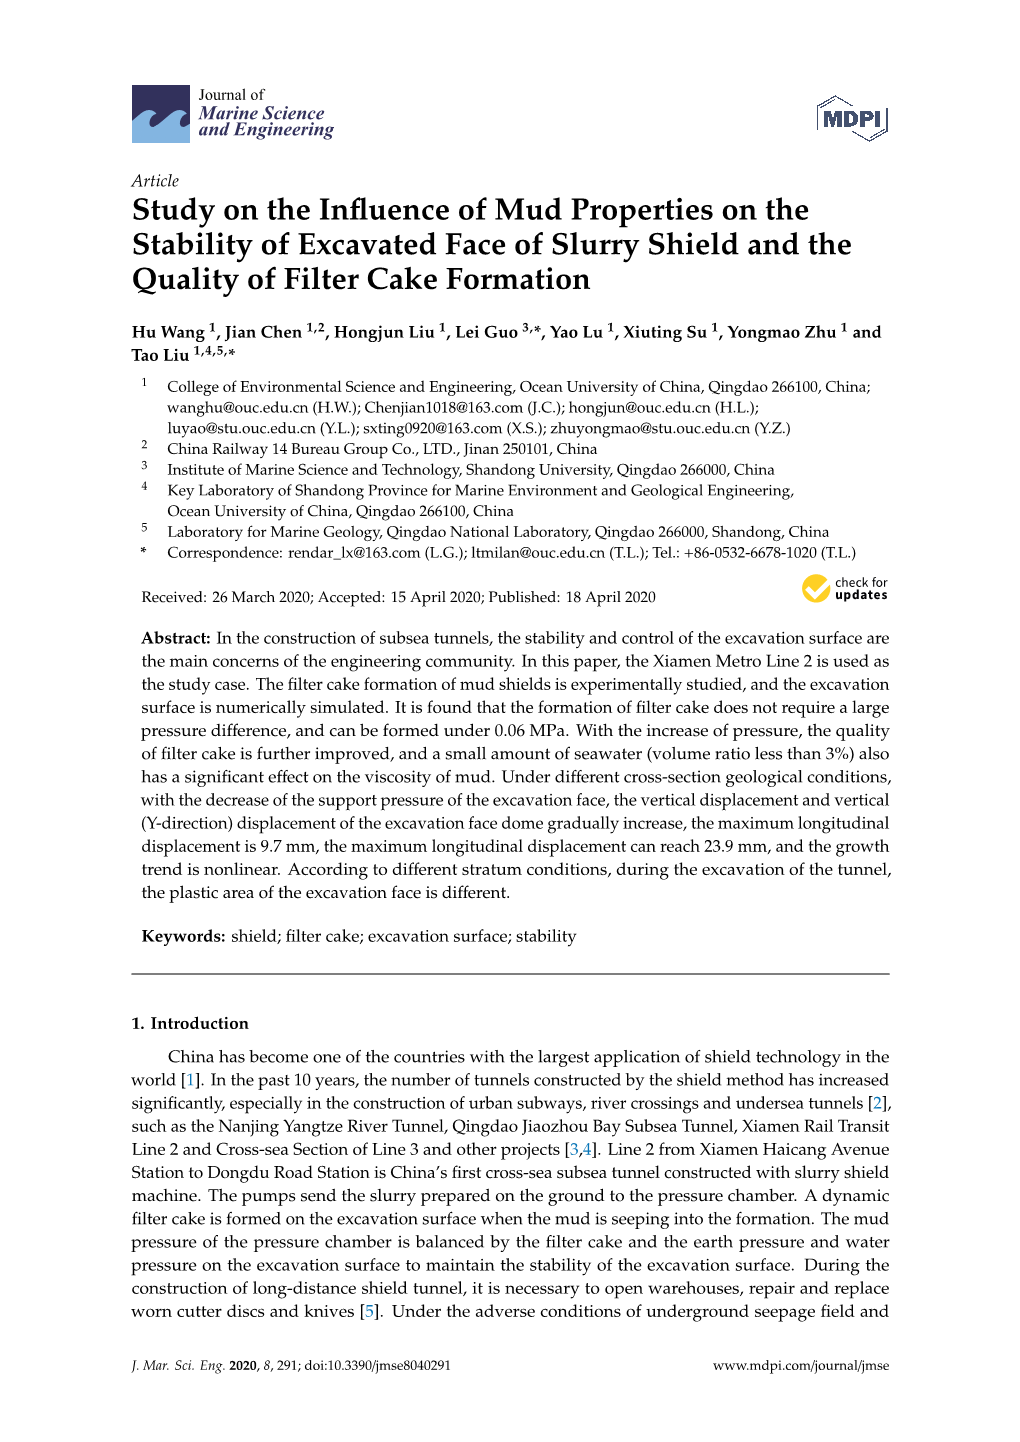 Study on the Influence of Mud Properties on the Stability of Excavated Face of Slurry Shield and the Quality of Filter Cake Form